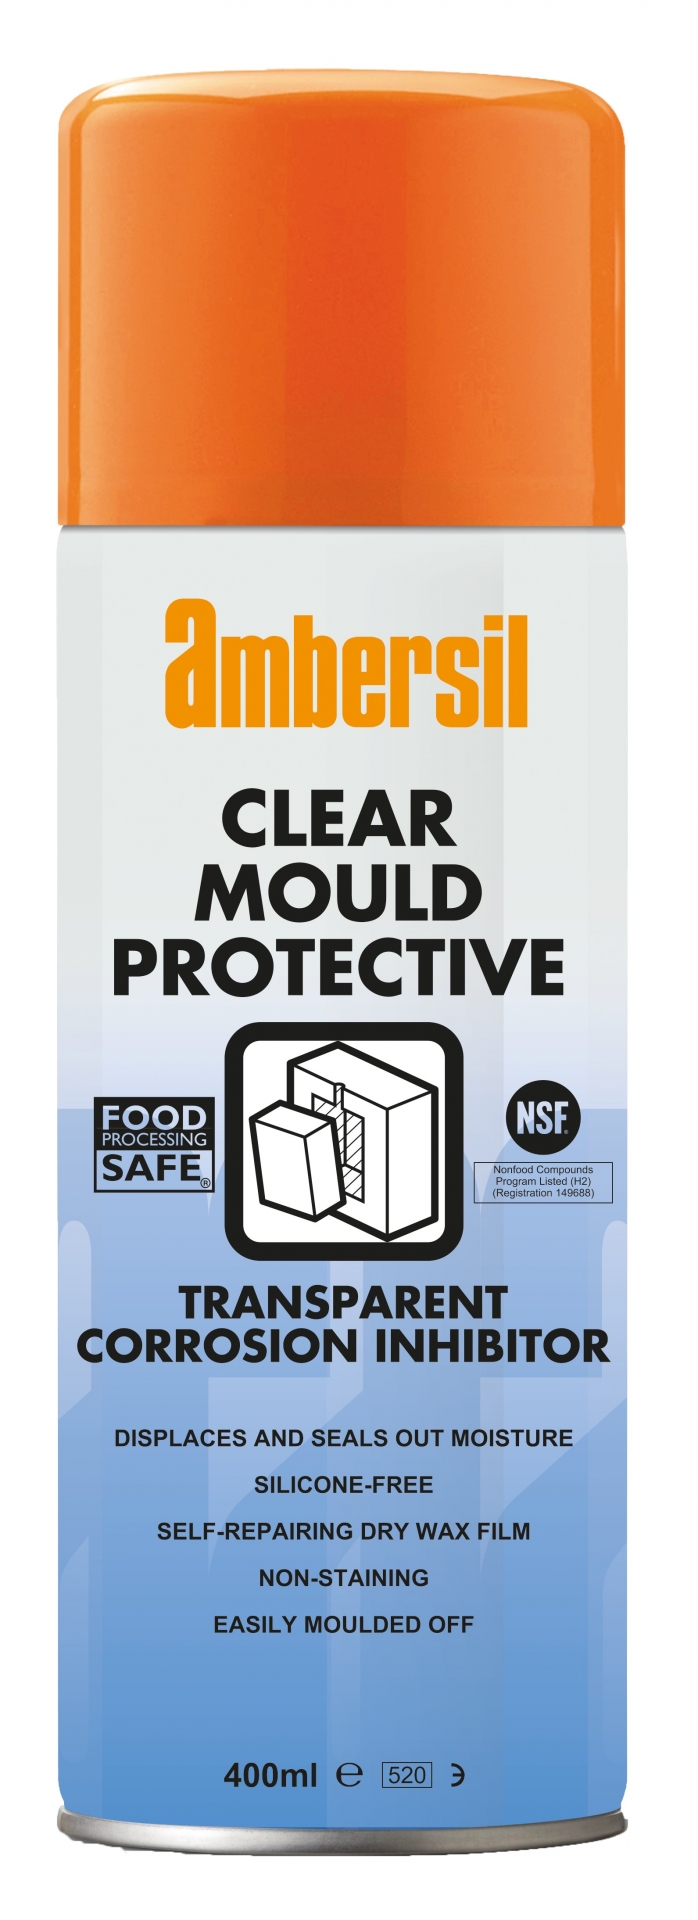 CLEAR MOULD PROTECTIVE